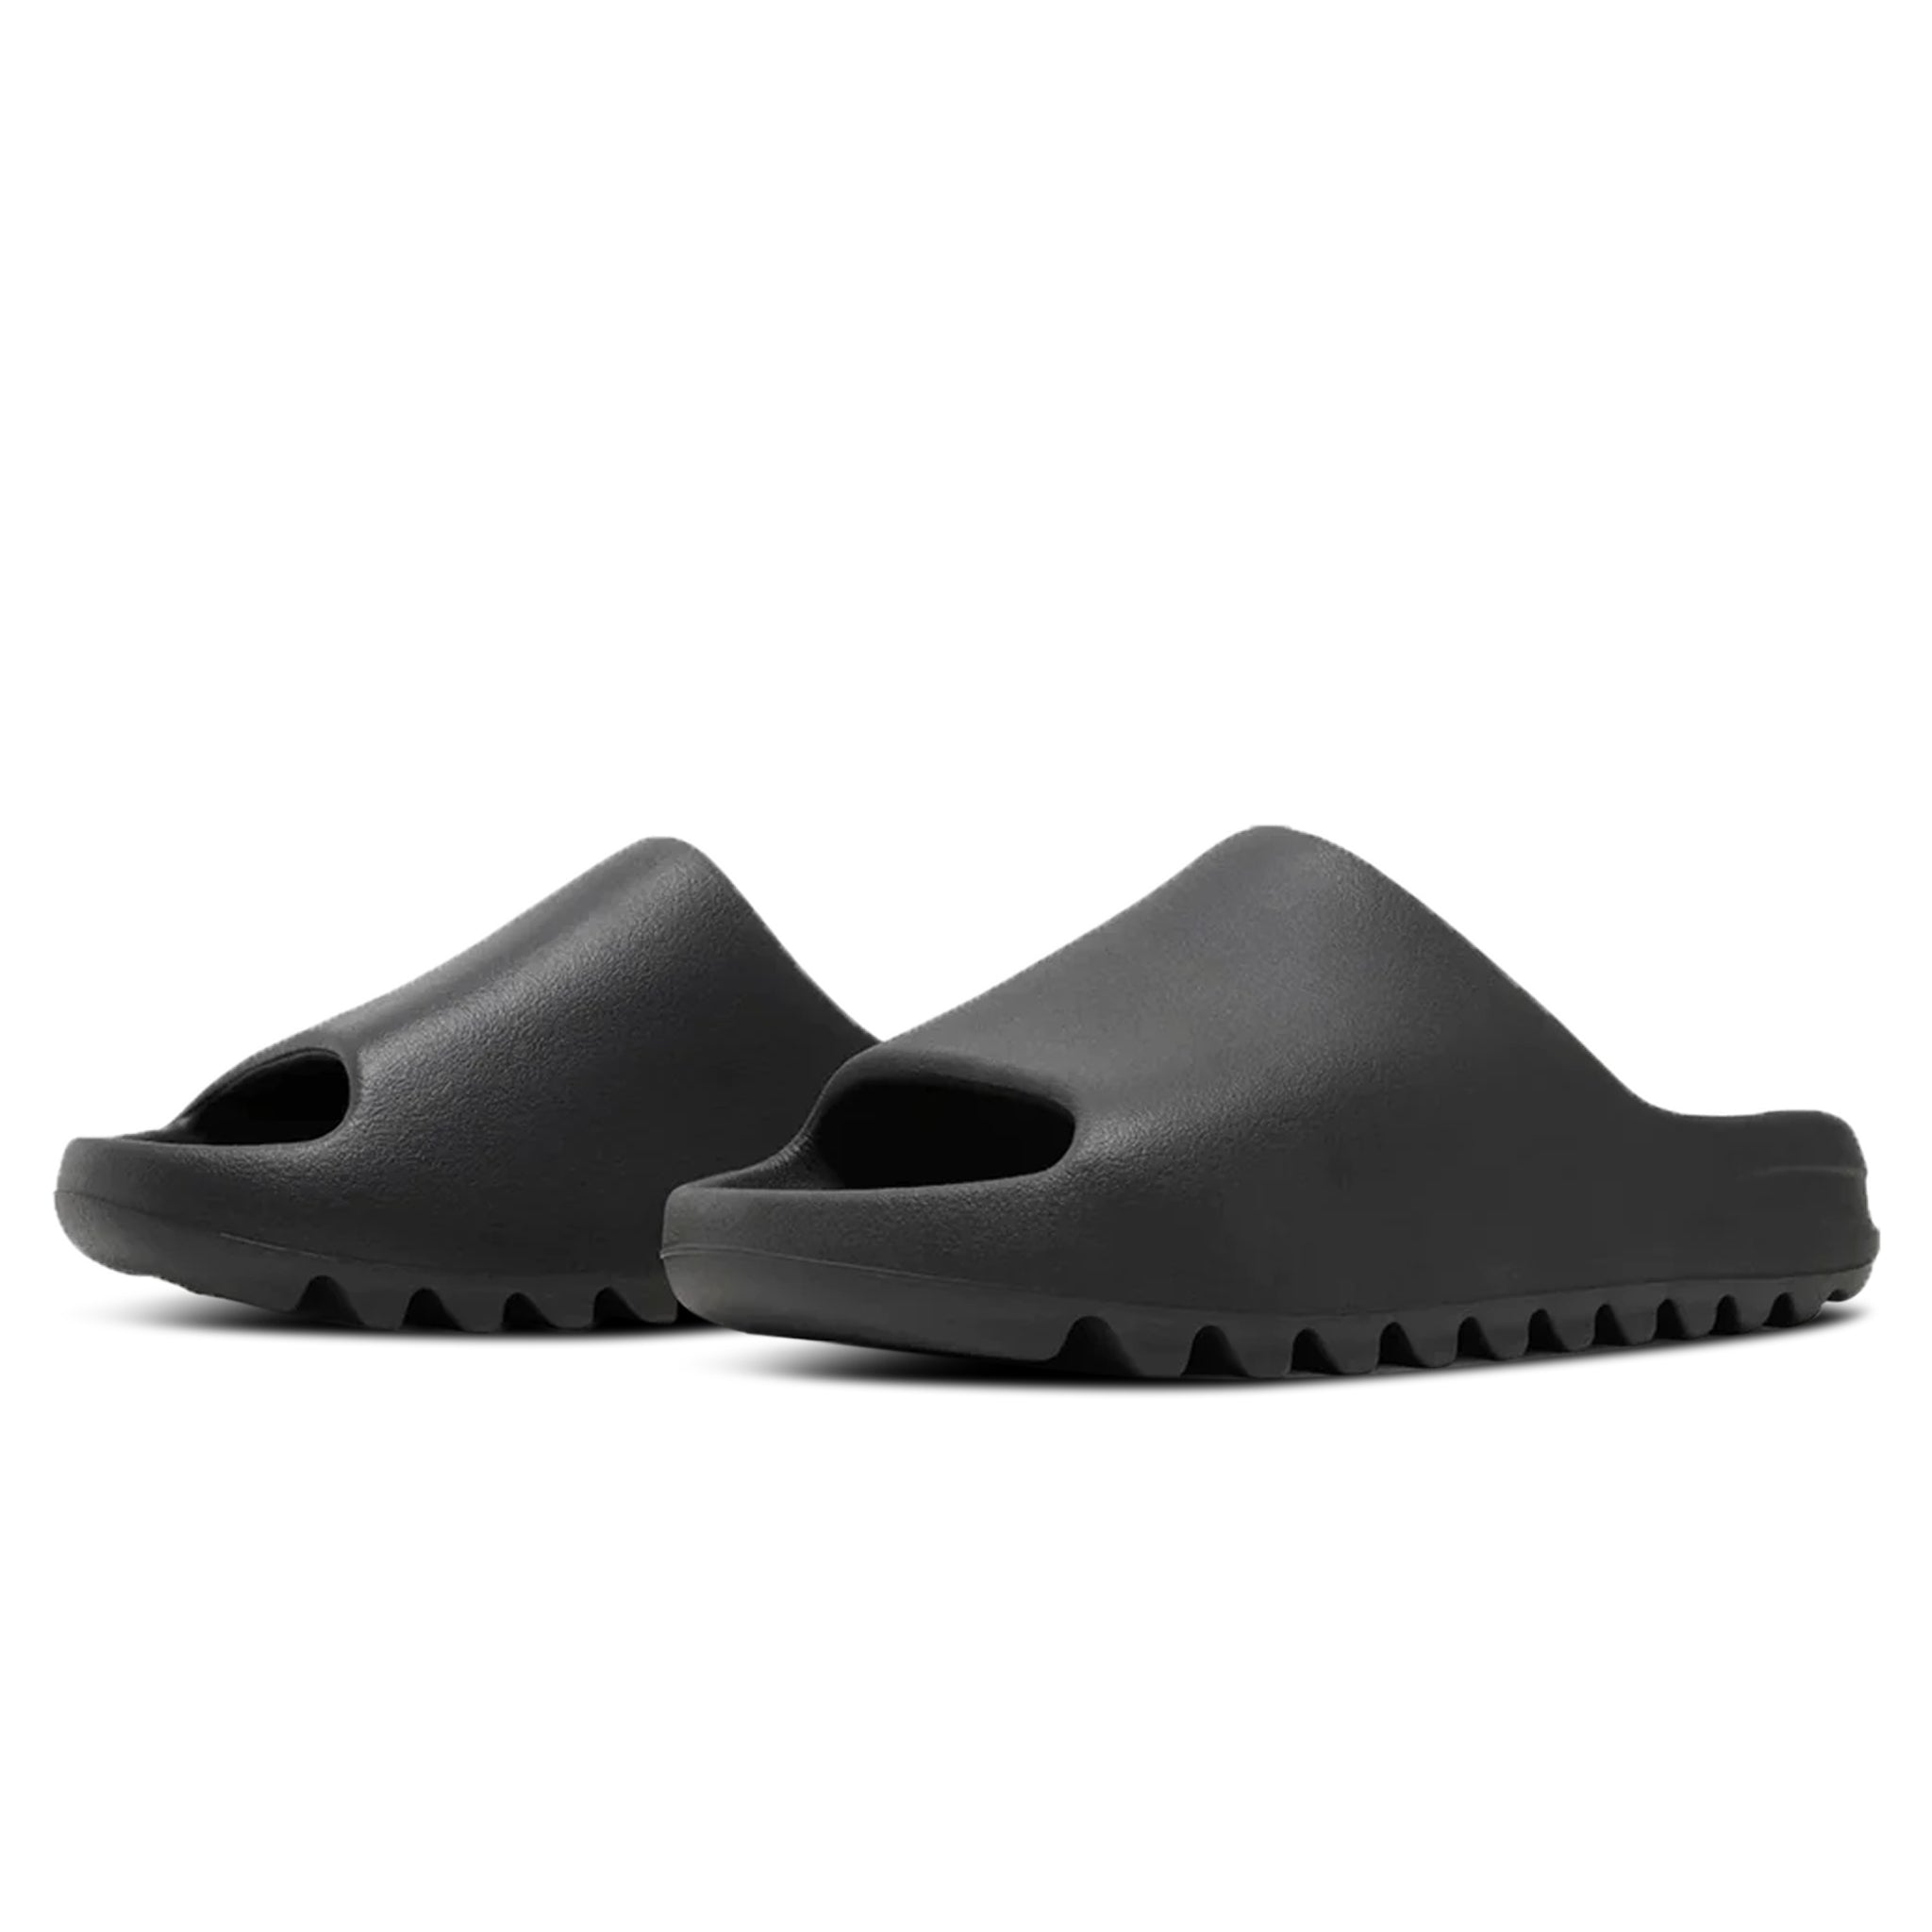 Front side view of Adidas Yeezy Slide Onyx HQ6448